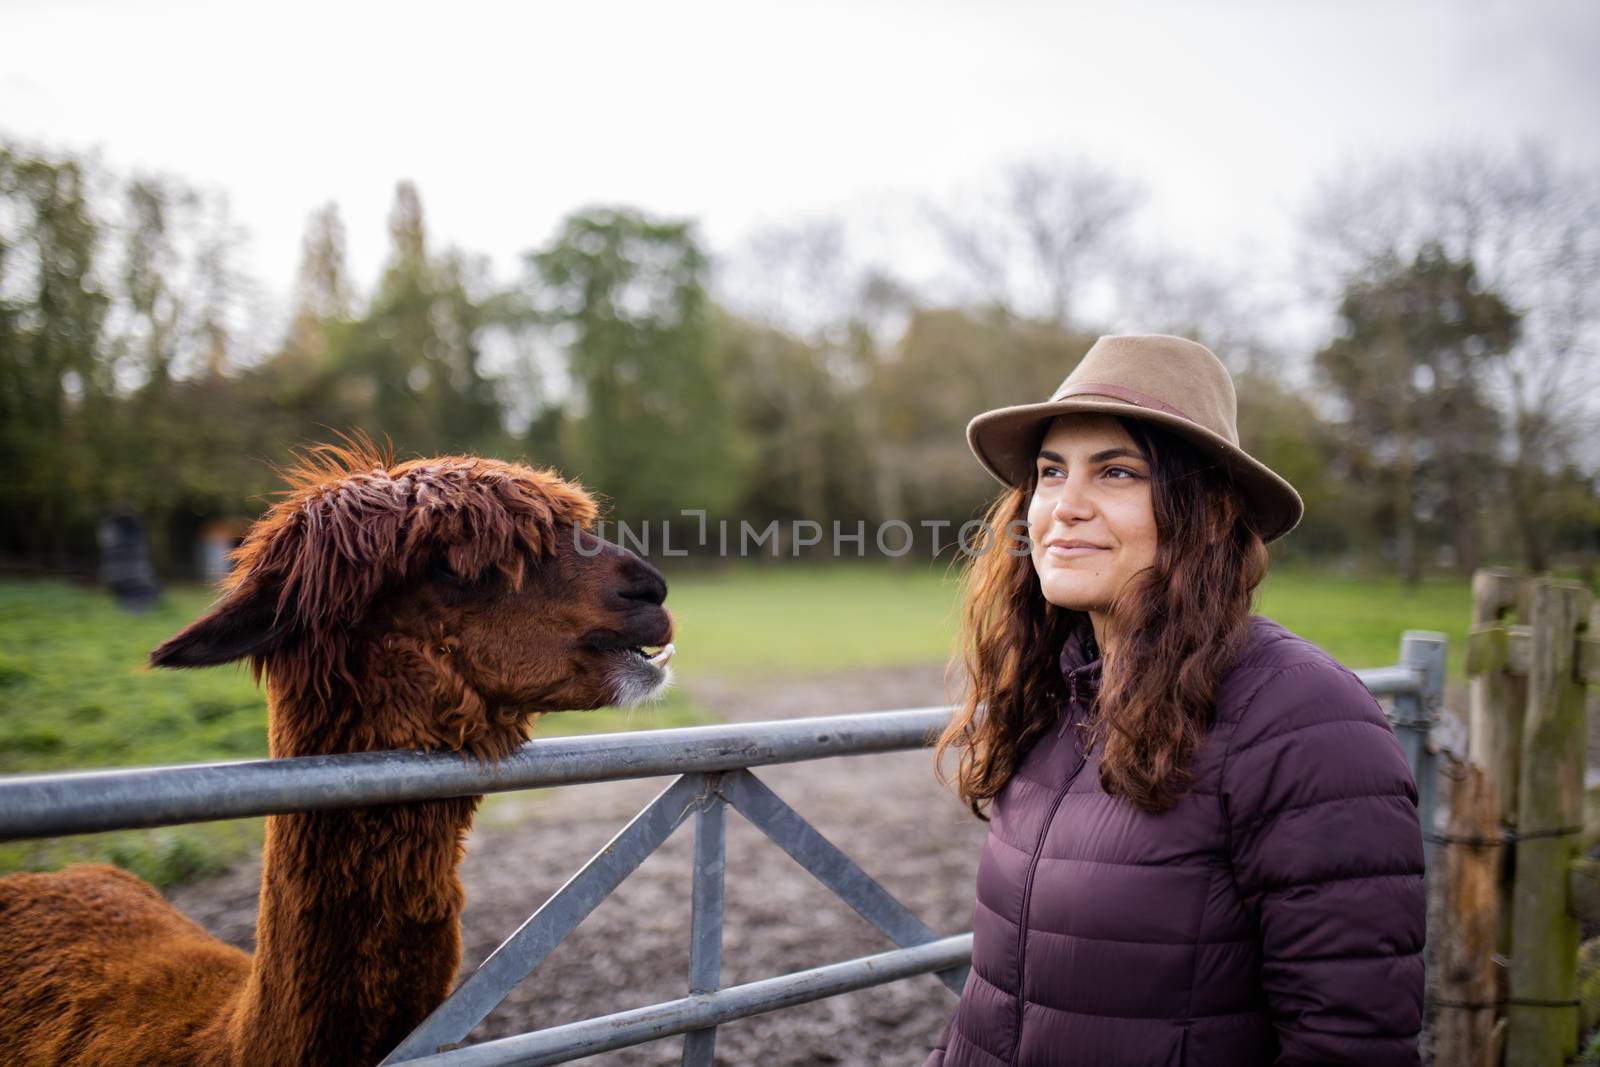 Smiling brunette woman wearing a hat, looking at the distance and standing next to a brown alpaca behind a metal fence, with a blurry forest as background